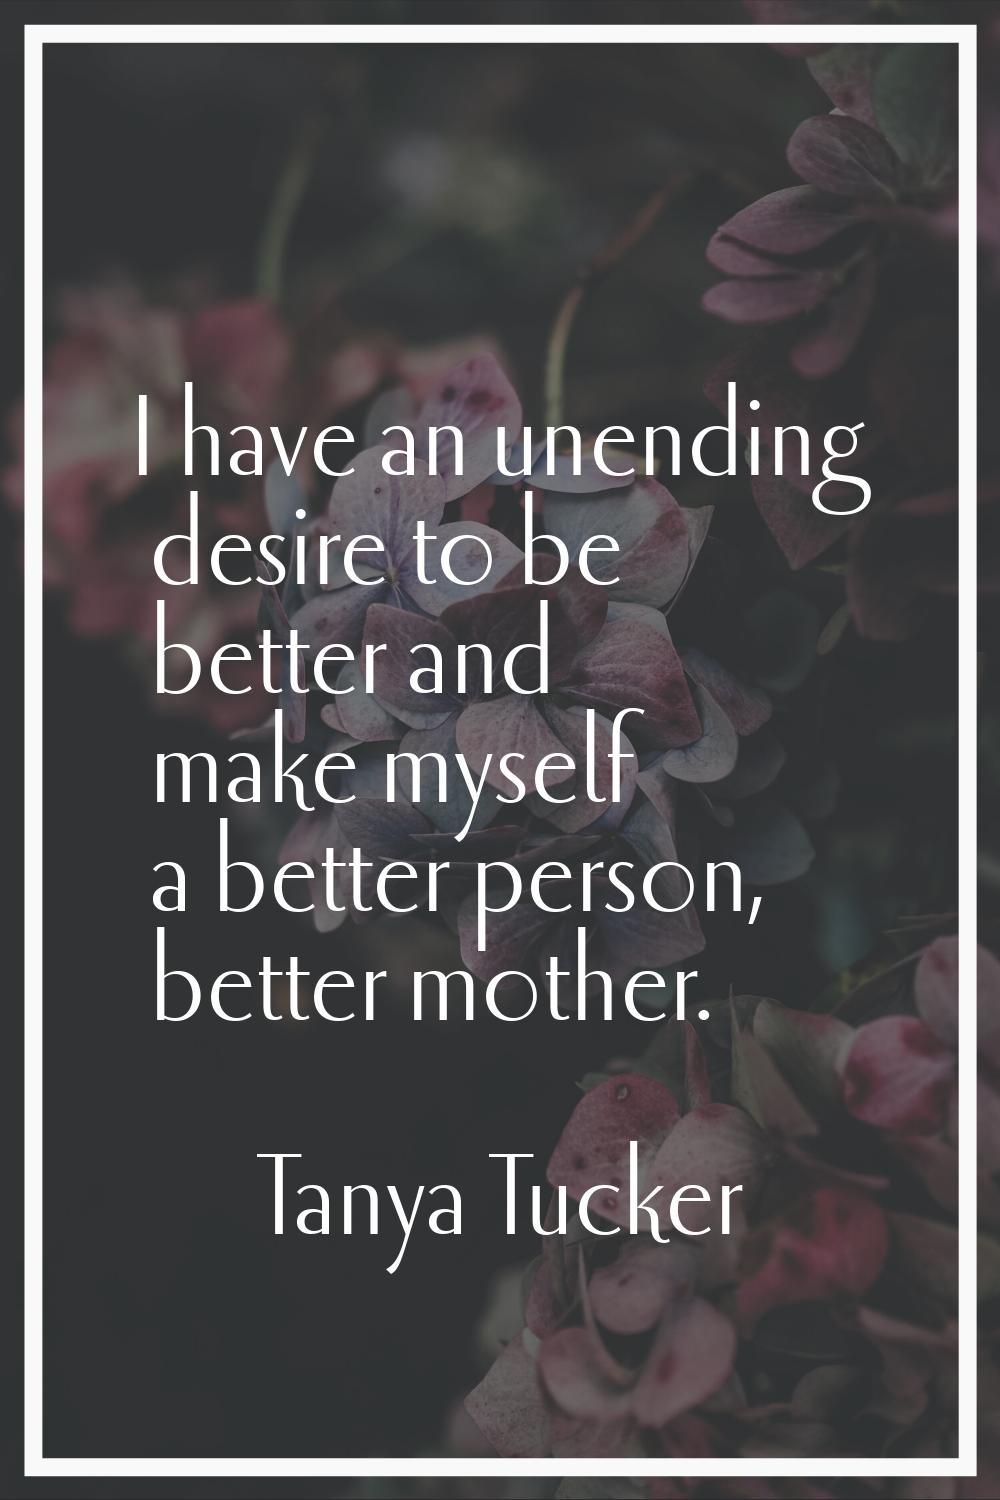 I have an unending desire to be better and make myself a better person, better mother.